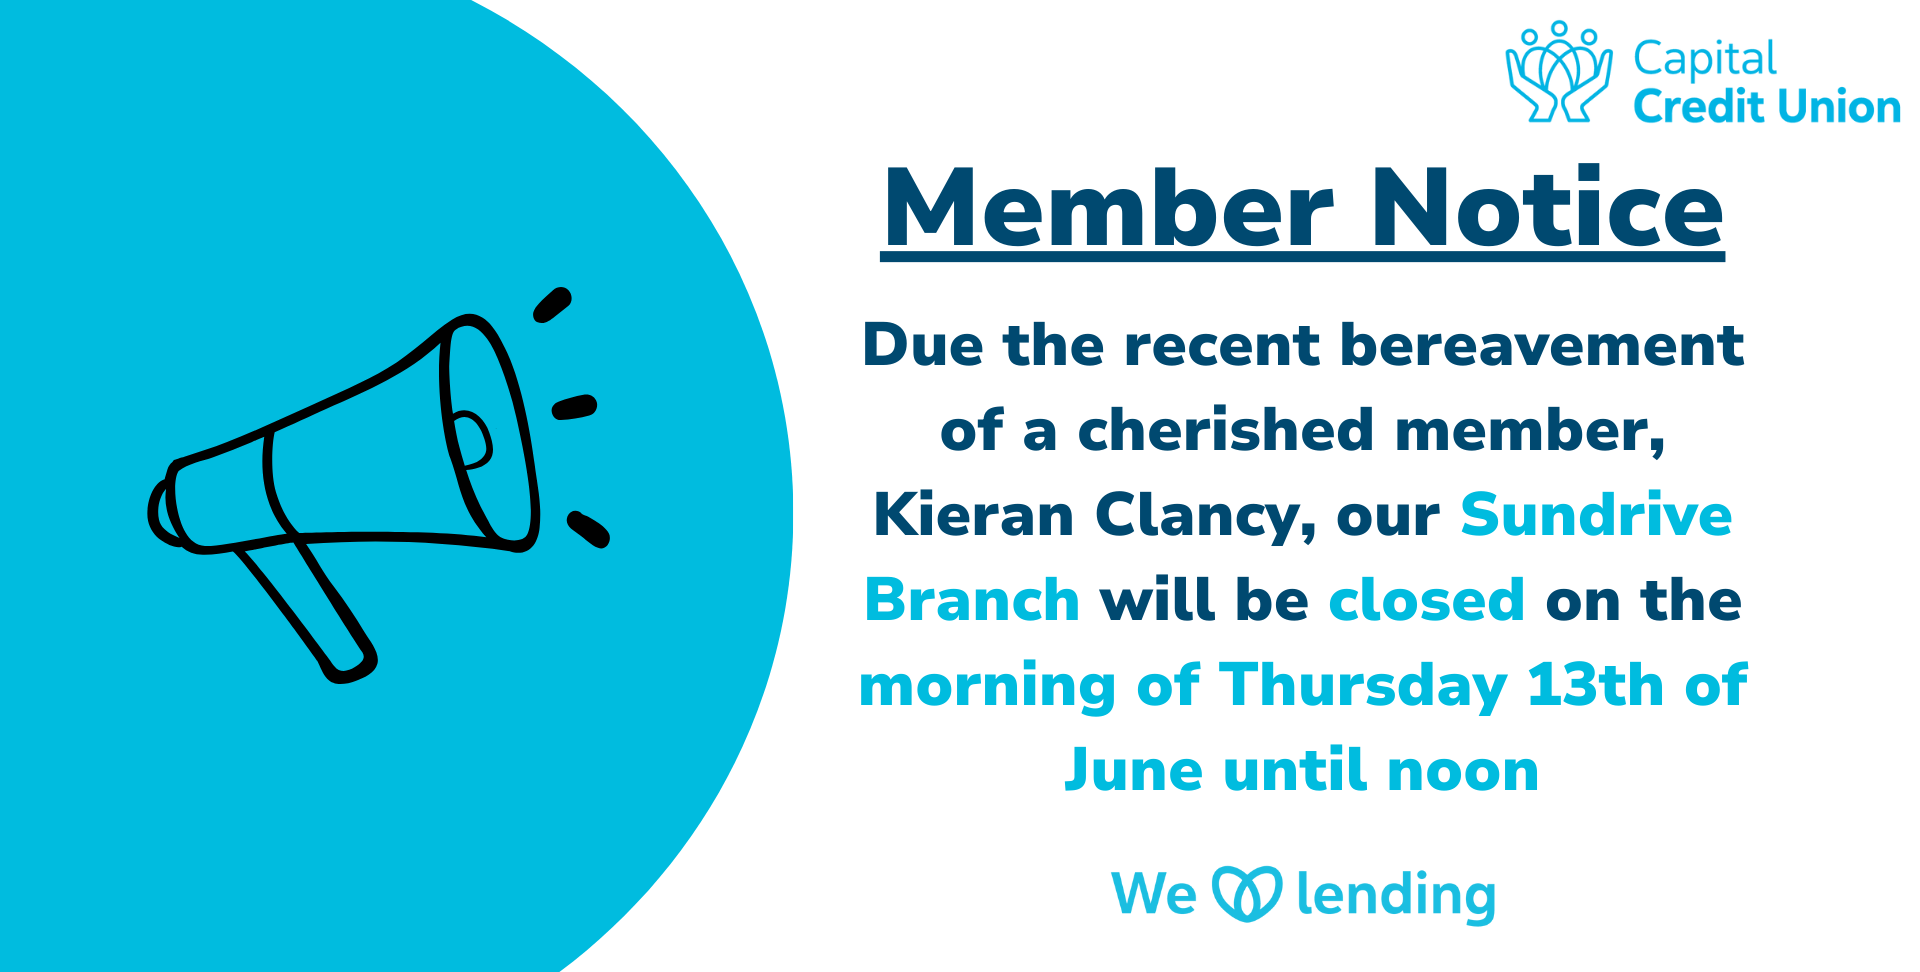 Our Sundrive Branch Will be Closed on the Morning of June 13th Until the Afternoon Due to a Recent Bereavement